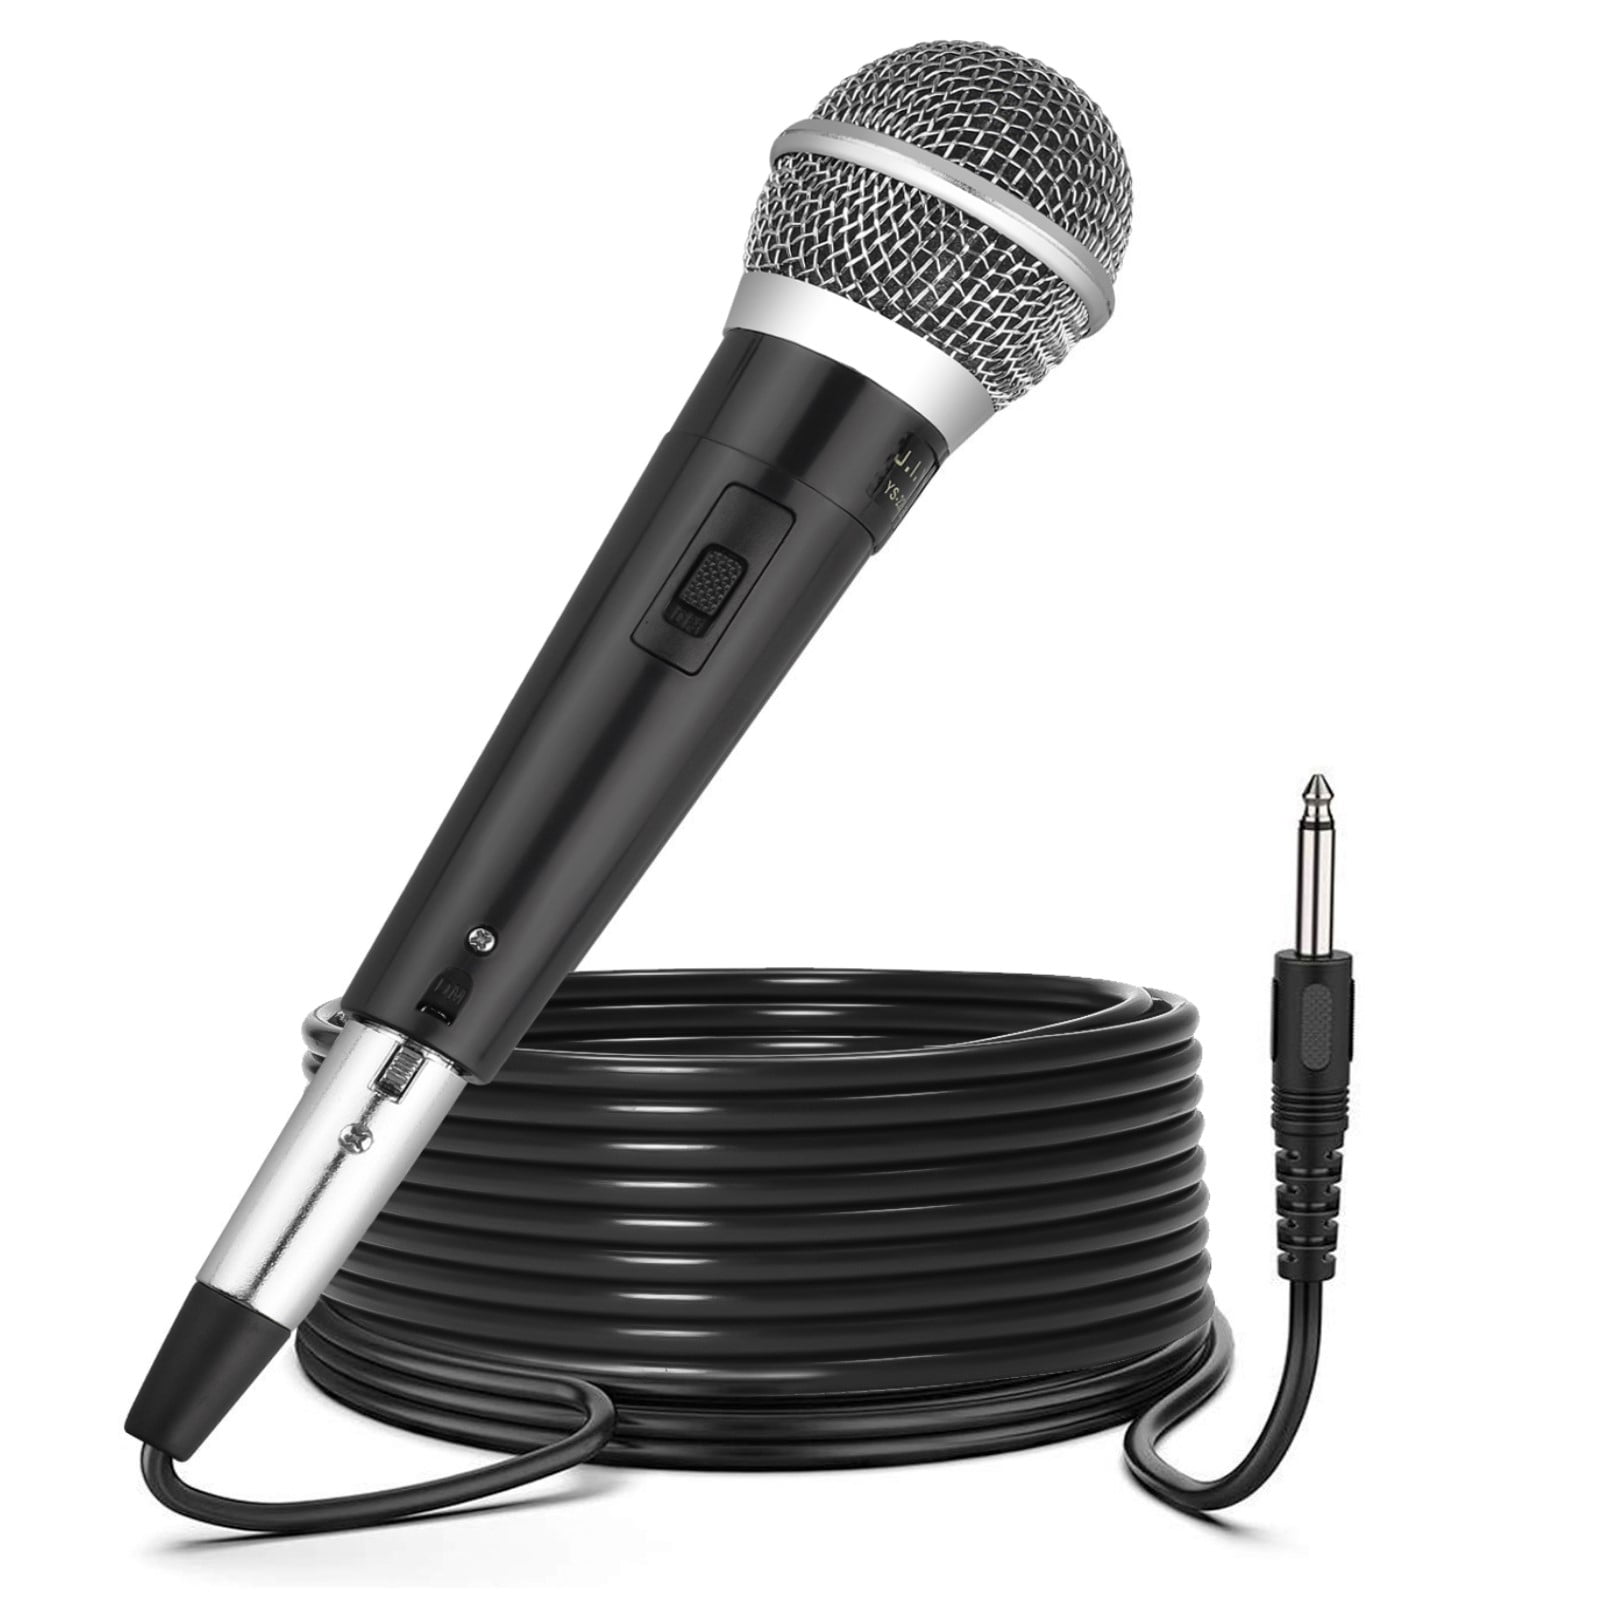 garden & living KARAOKE USA M189 Professional Dynamic Microphone with Detachable Cord Home 